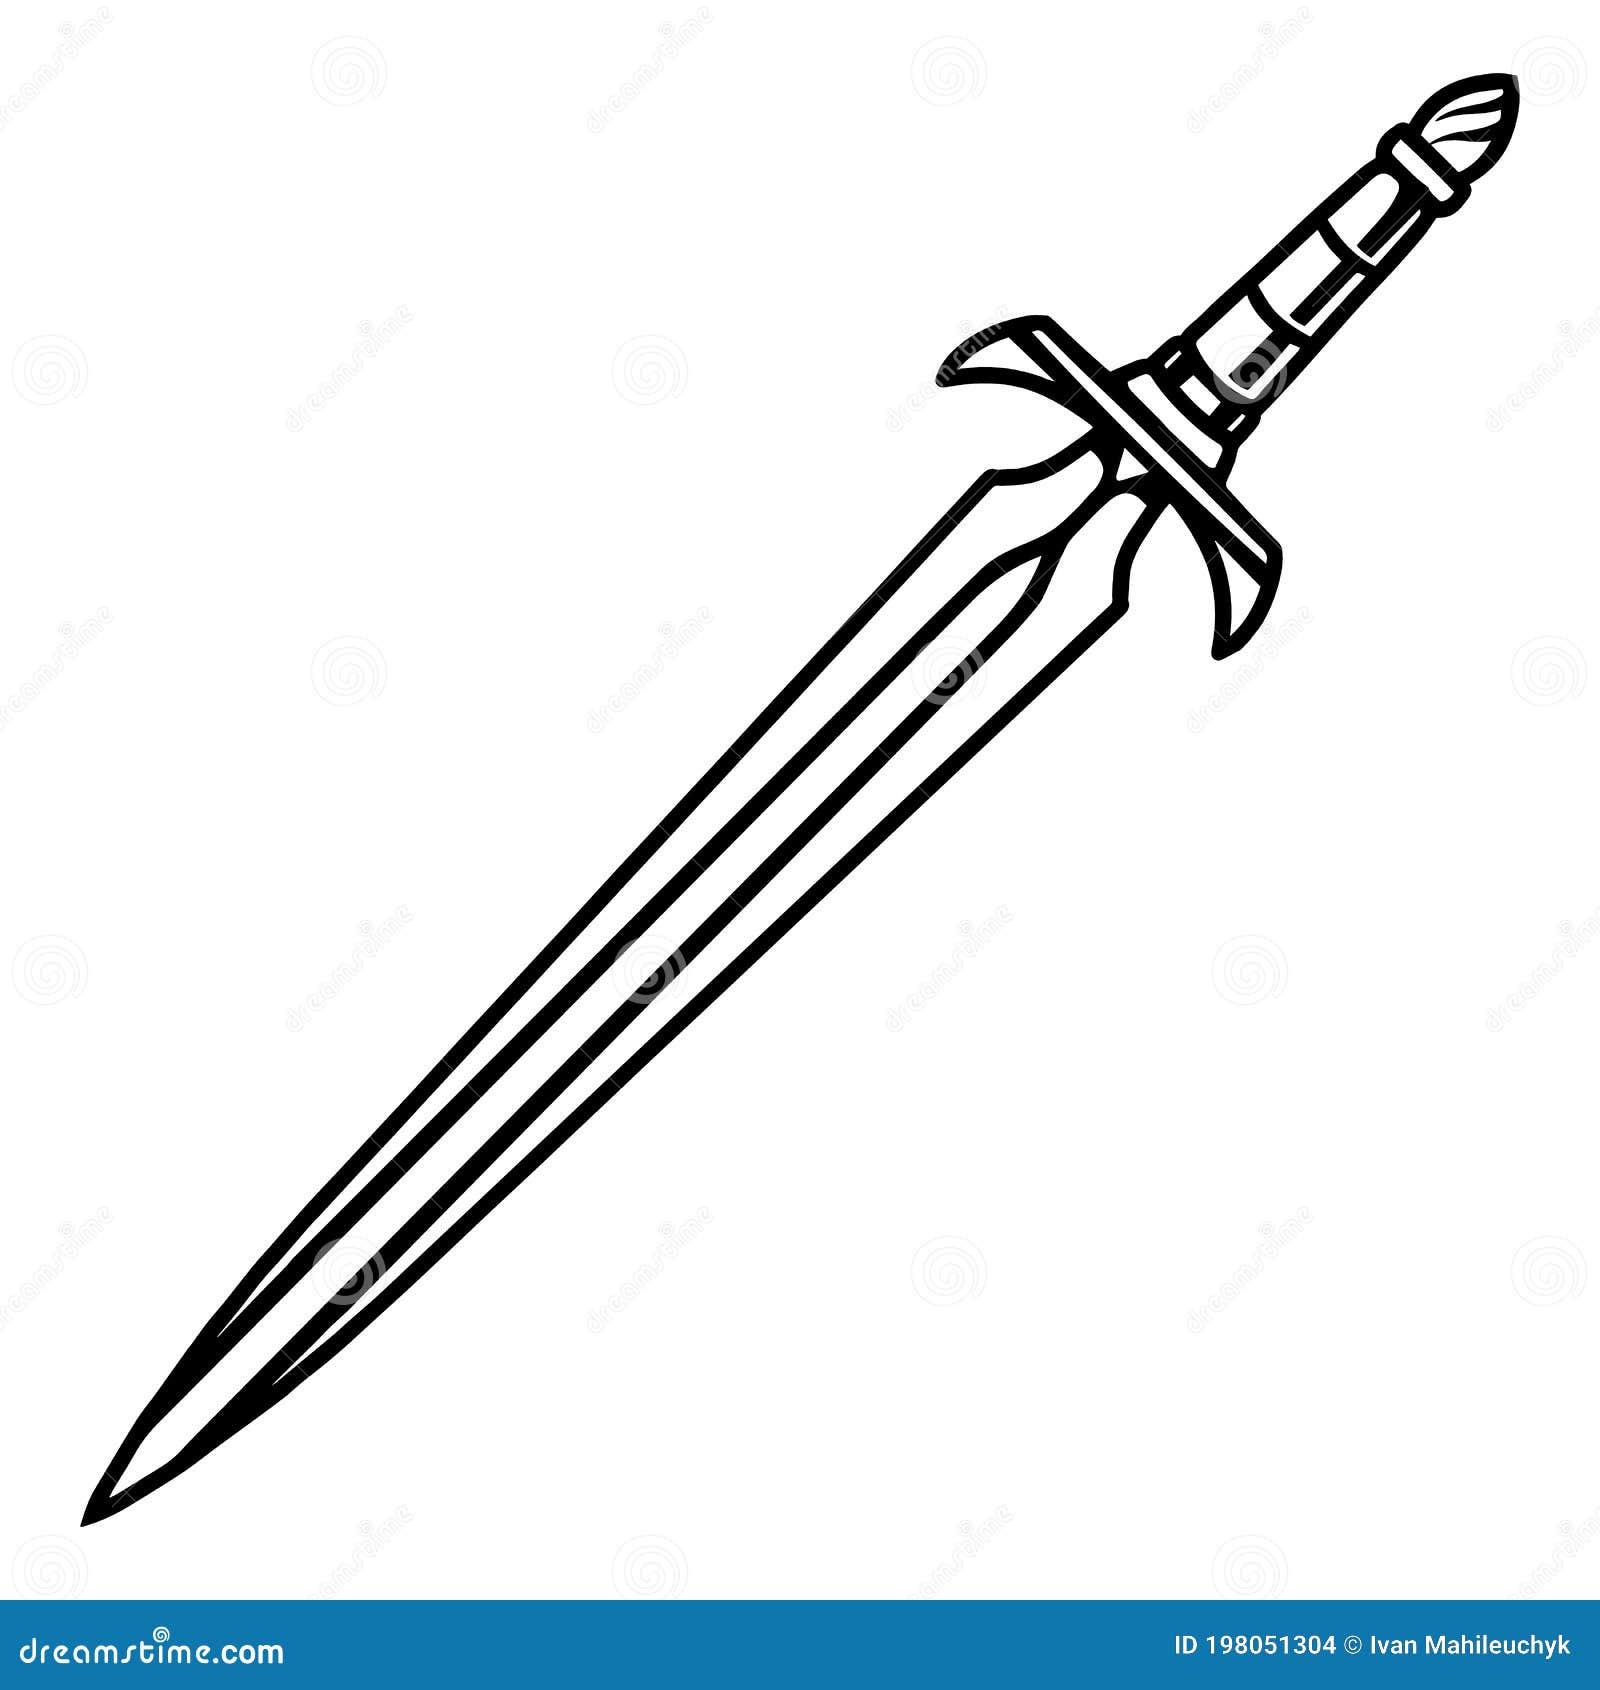 Unique Sword Tattoo Designs at Ace Tattooz - Ink Your Story Today